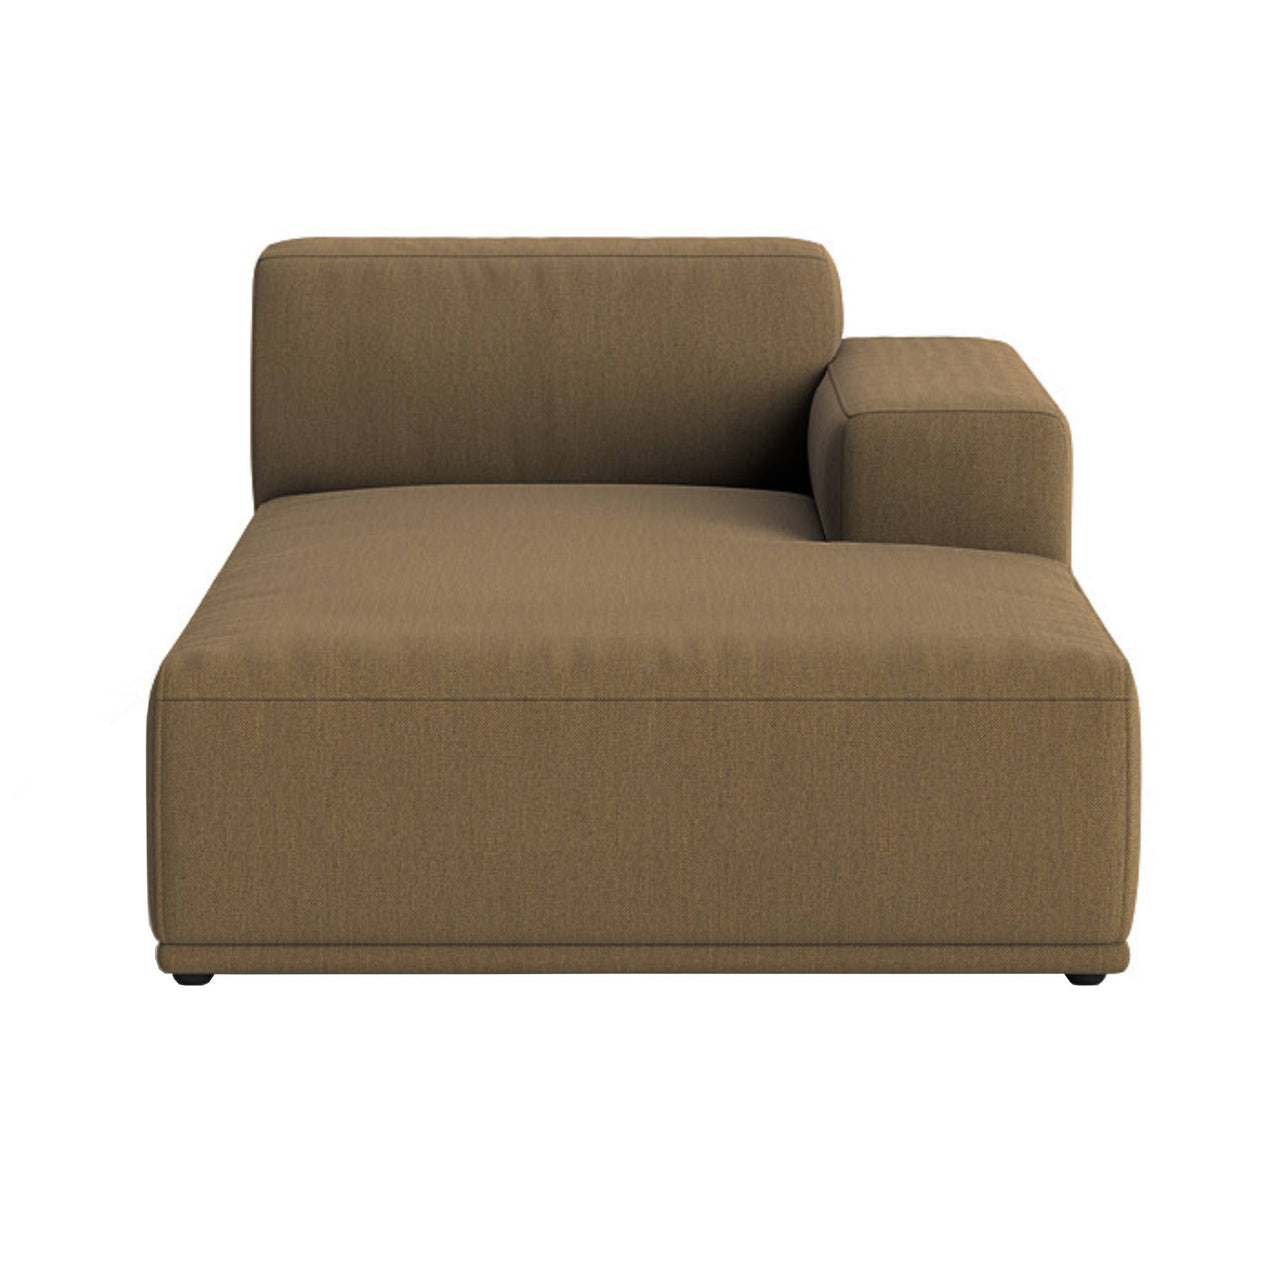 Connect Soft Sofa Modules: Right Armrest Lounge